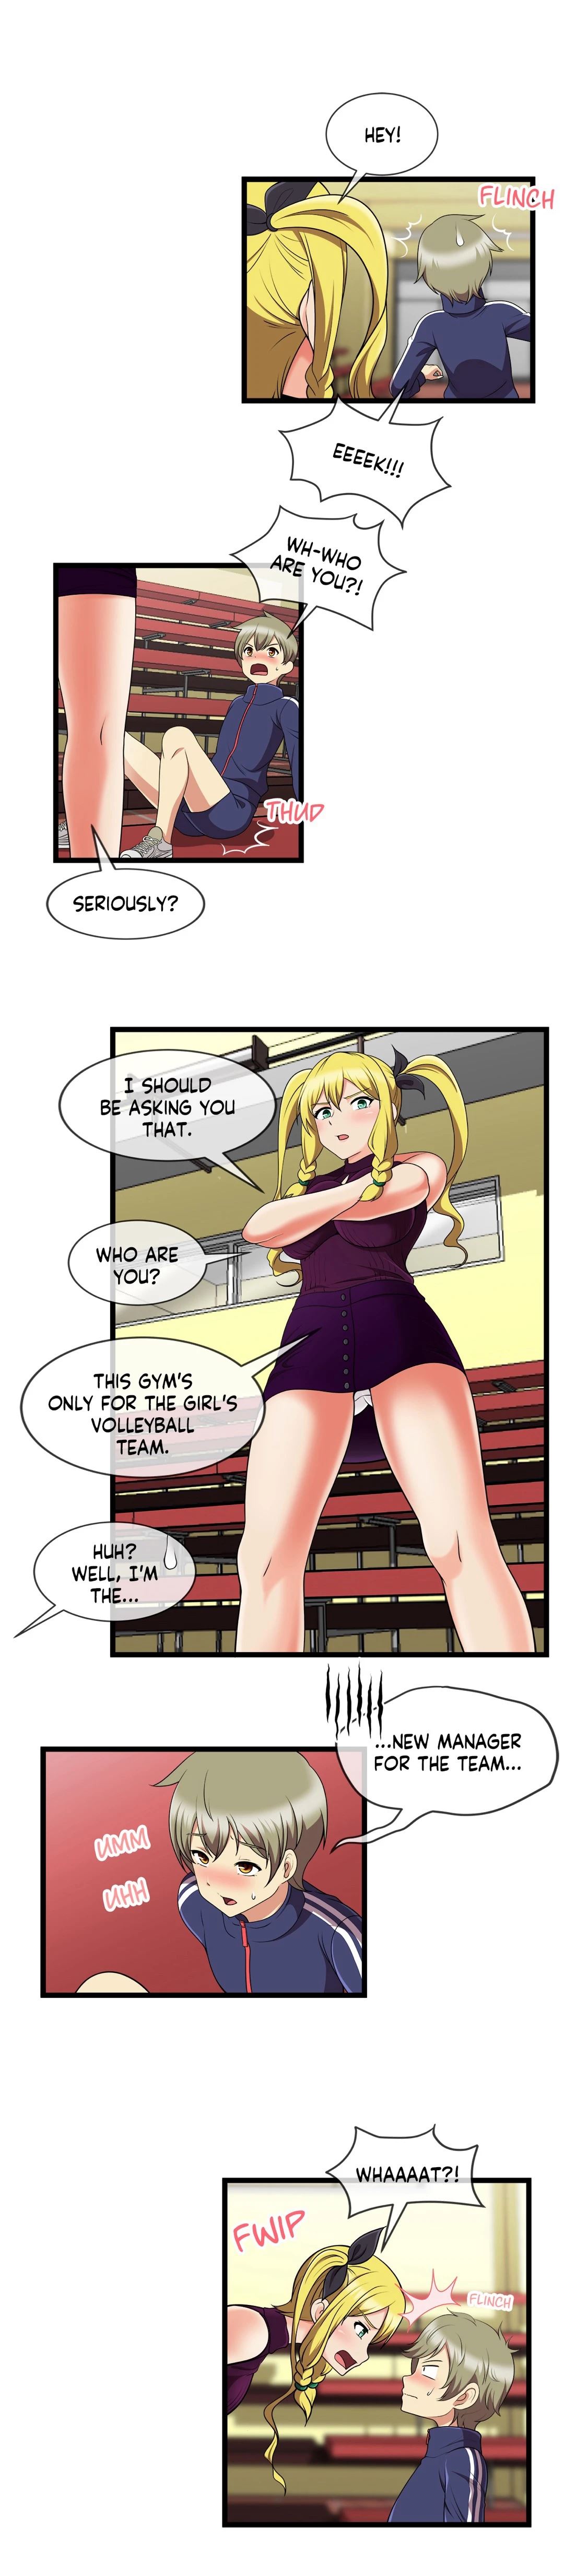 The Naughty Volleyball Team image